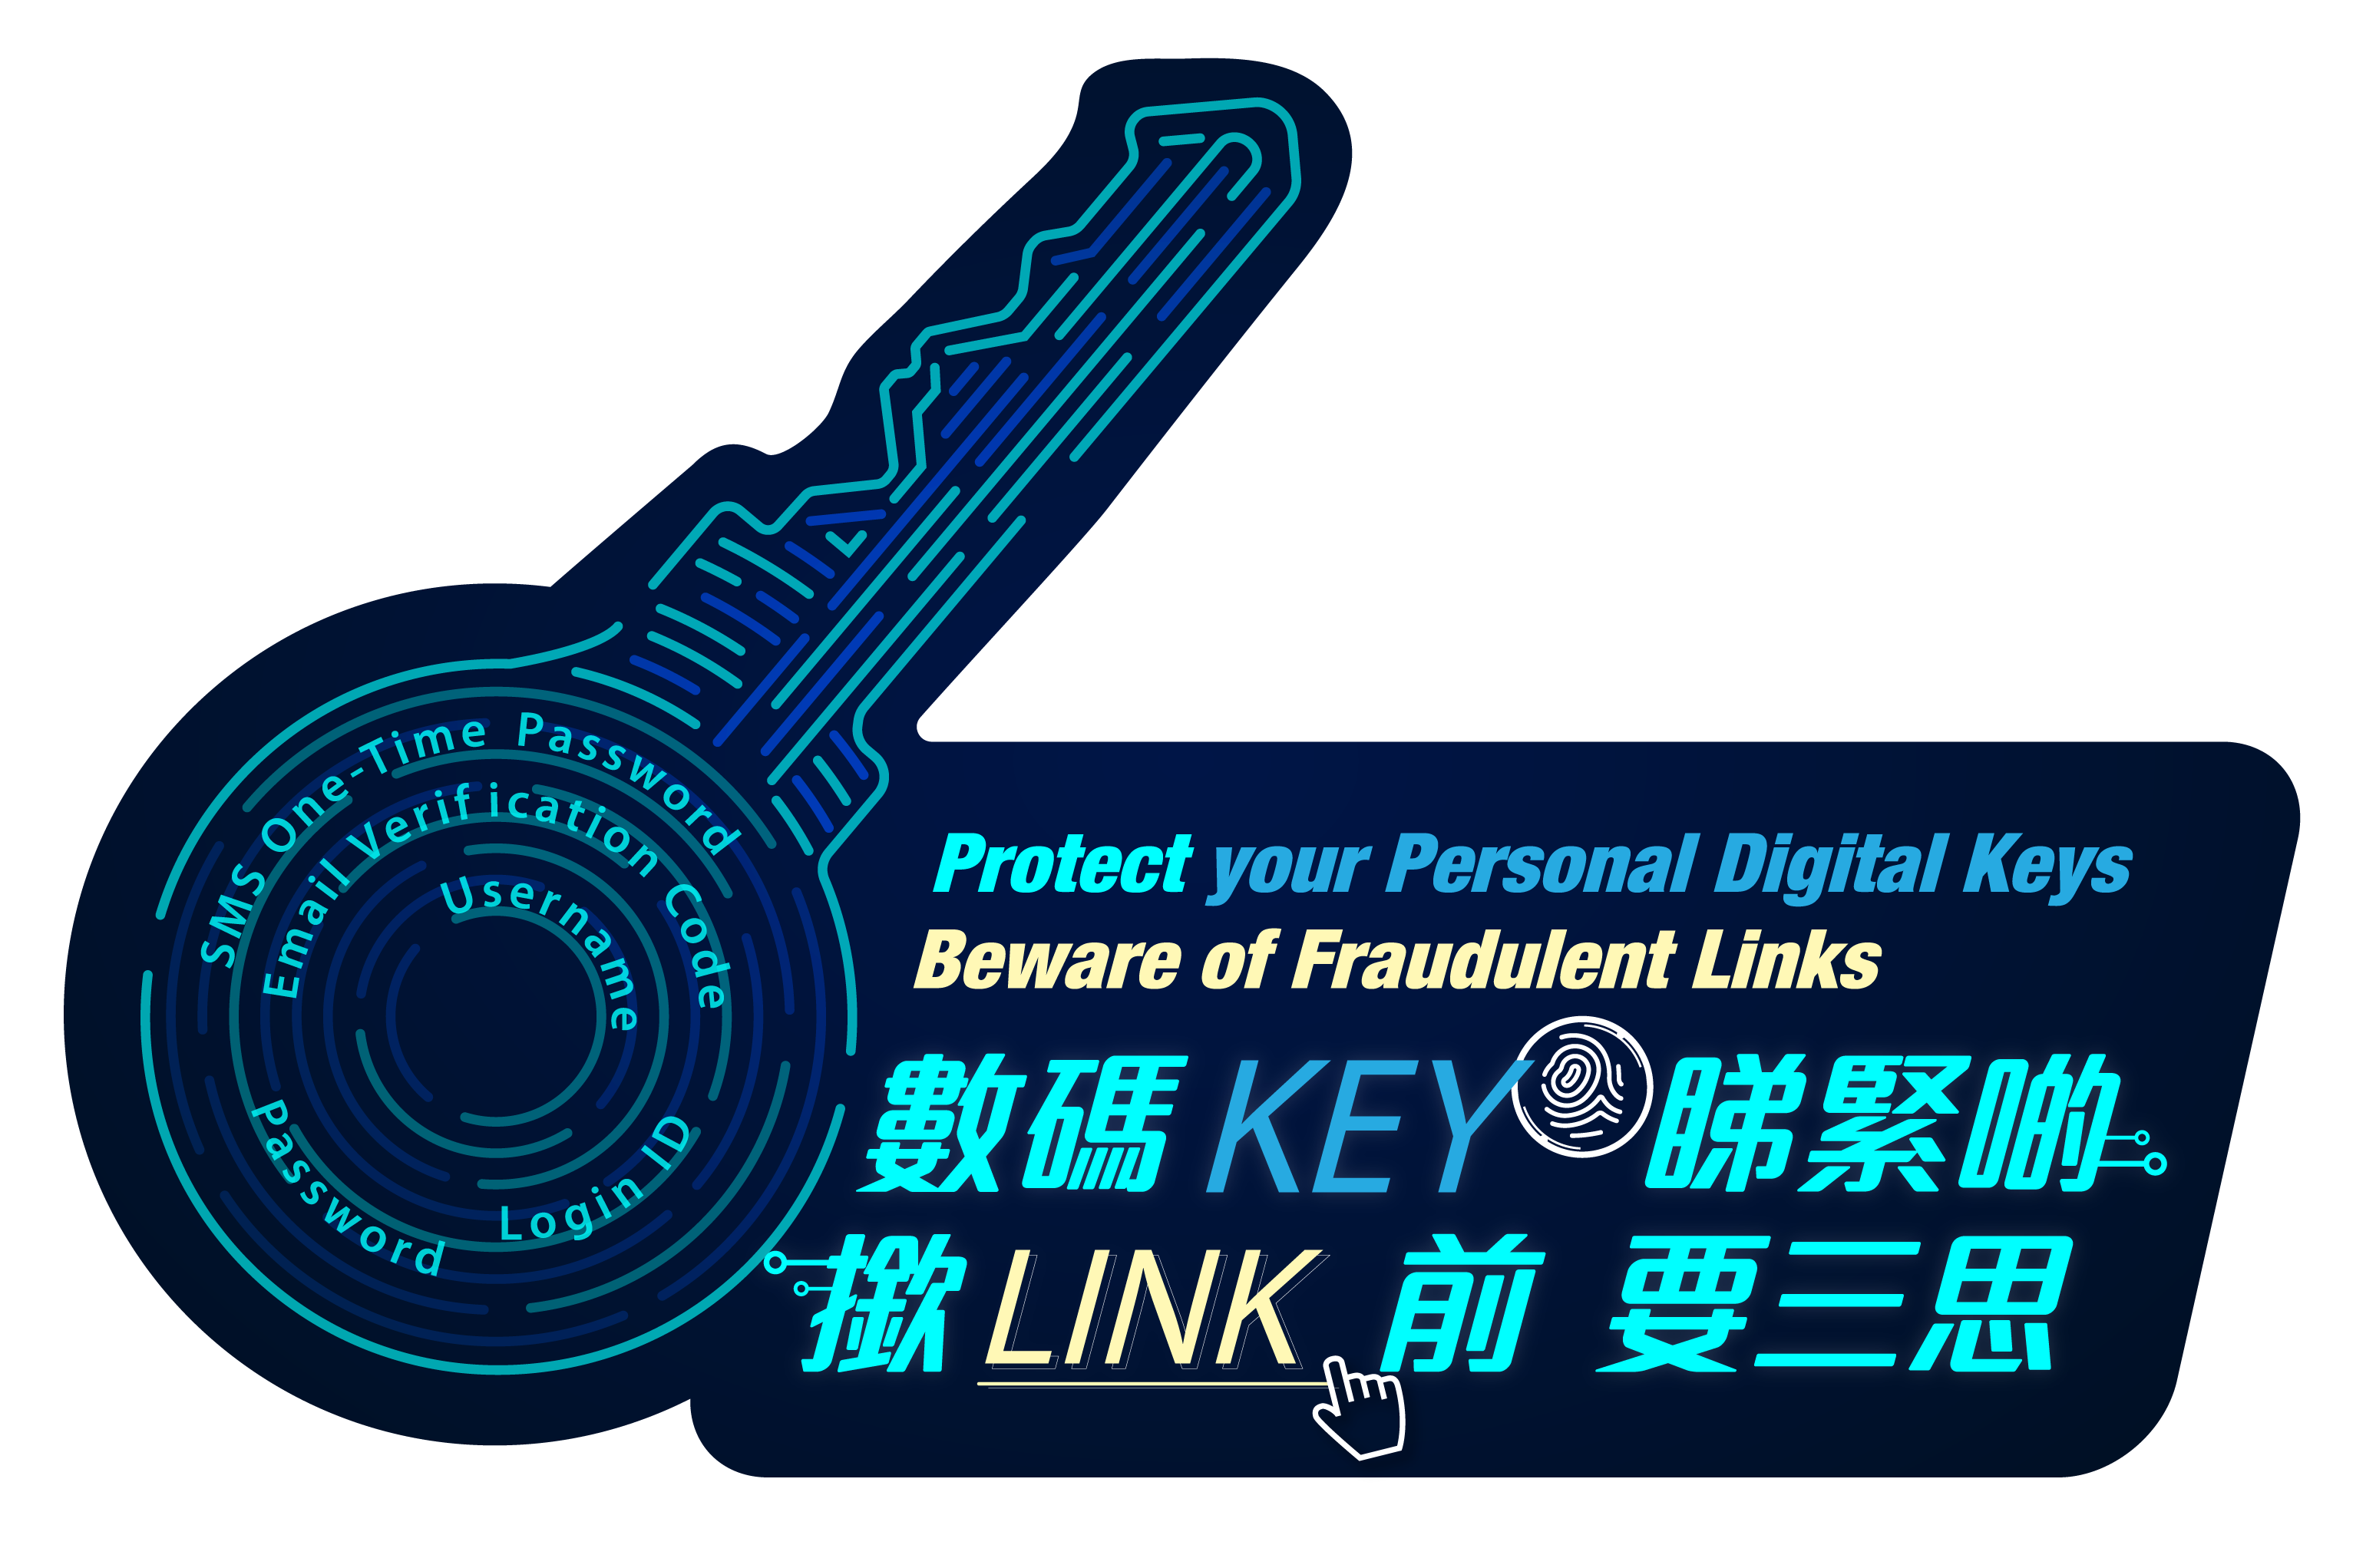 Protect your Personal Digital Keys